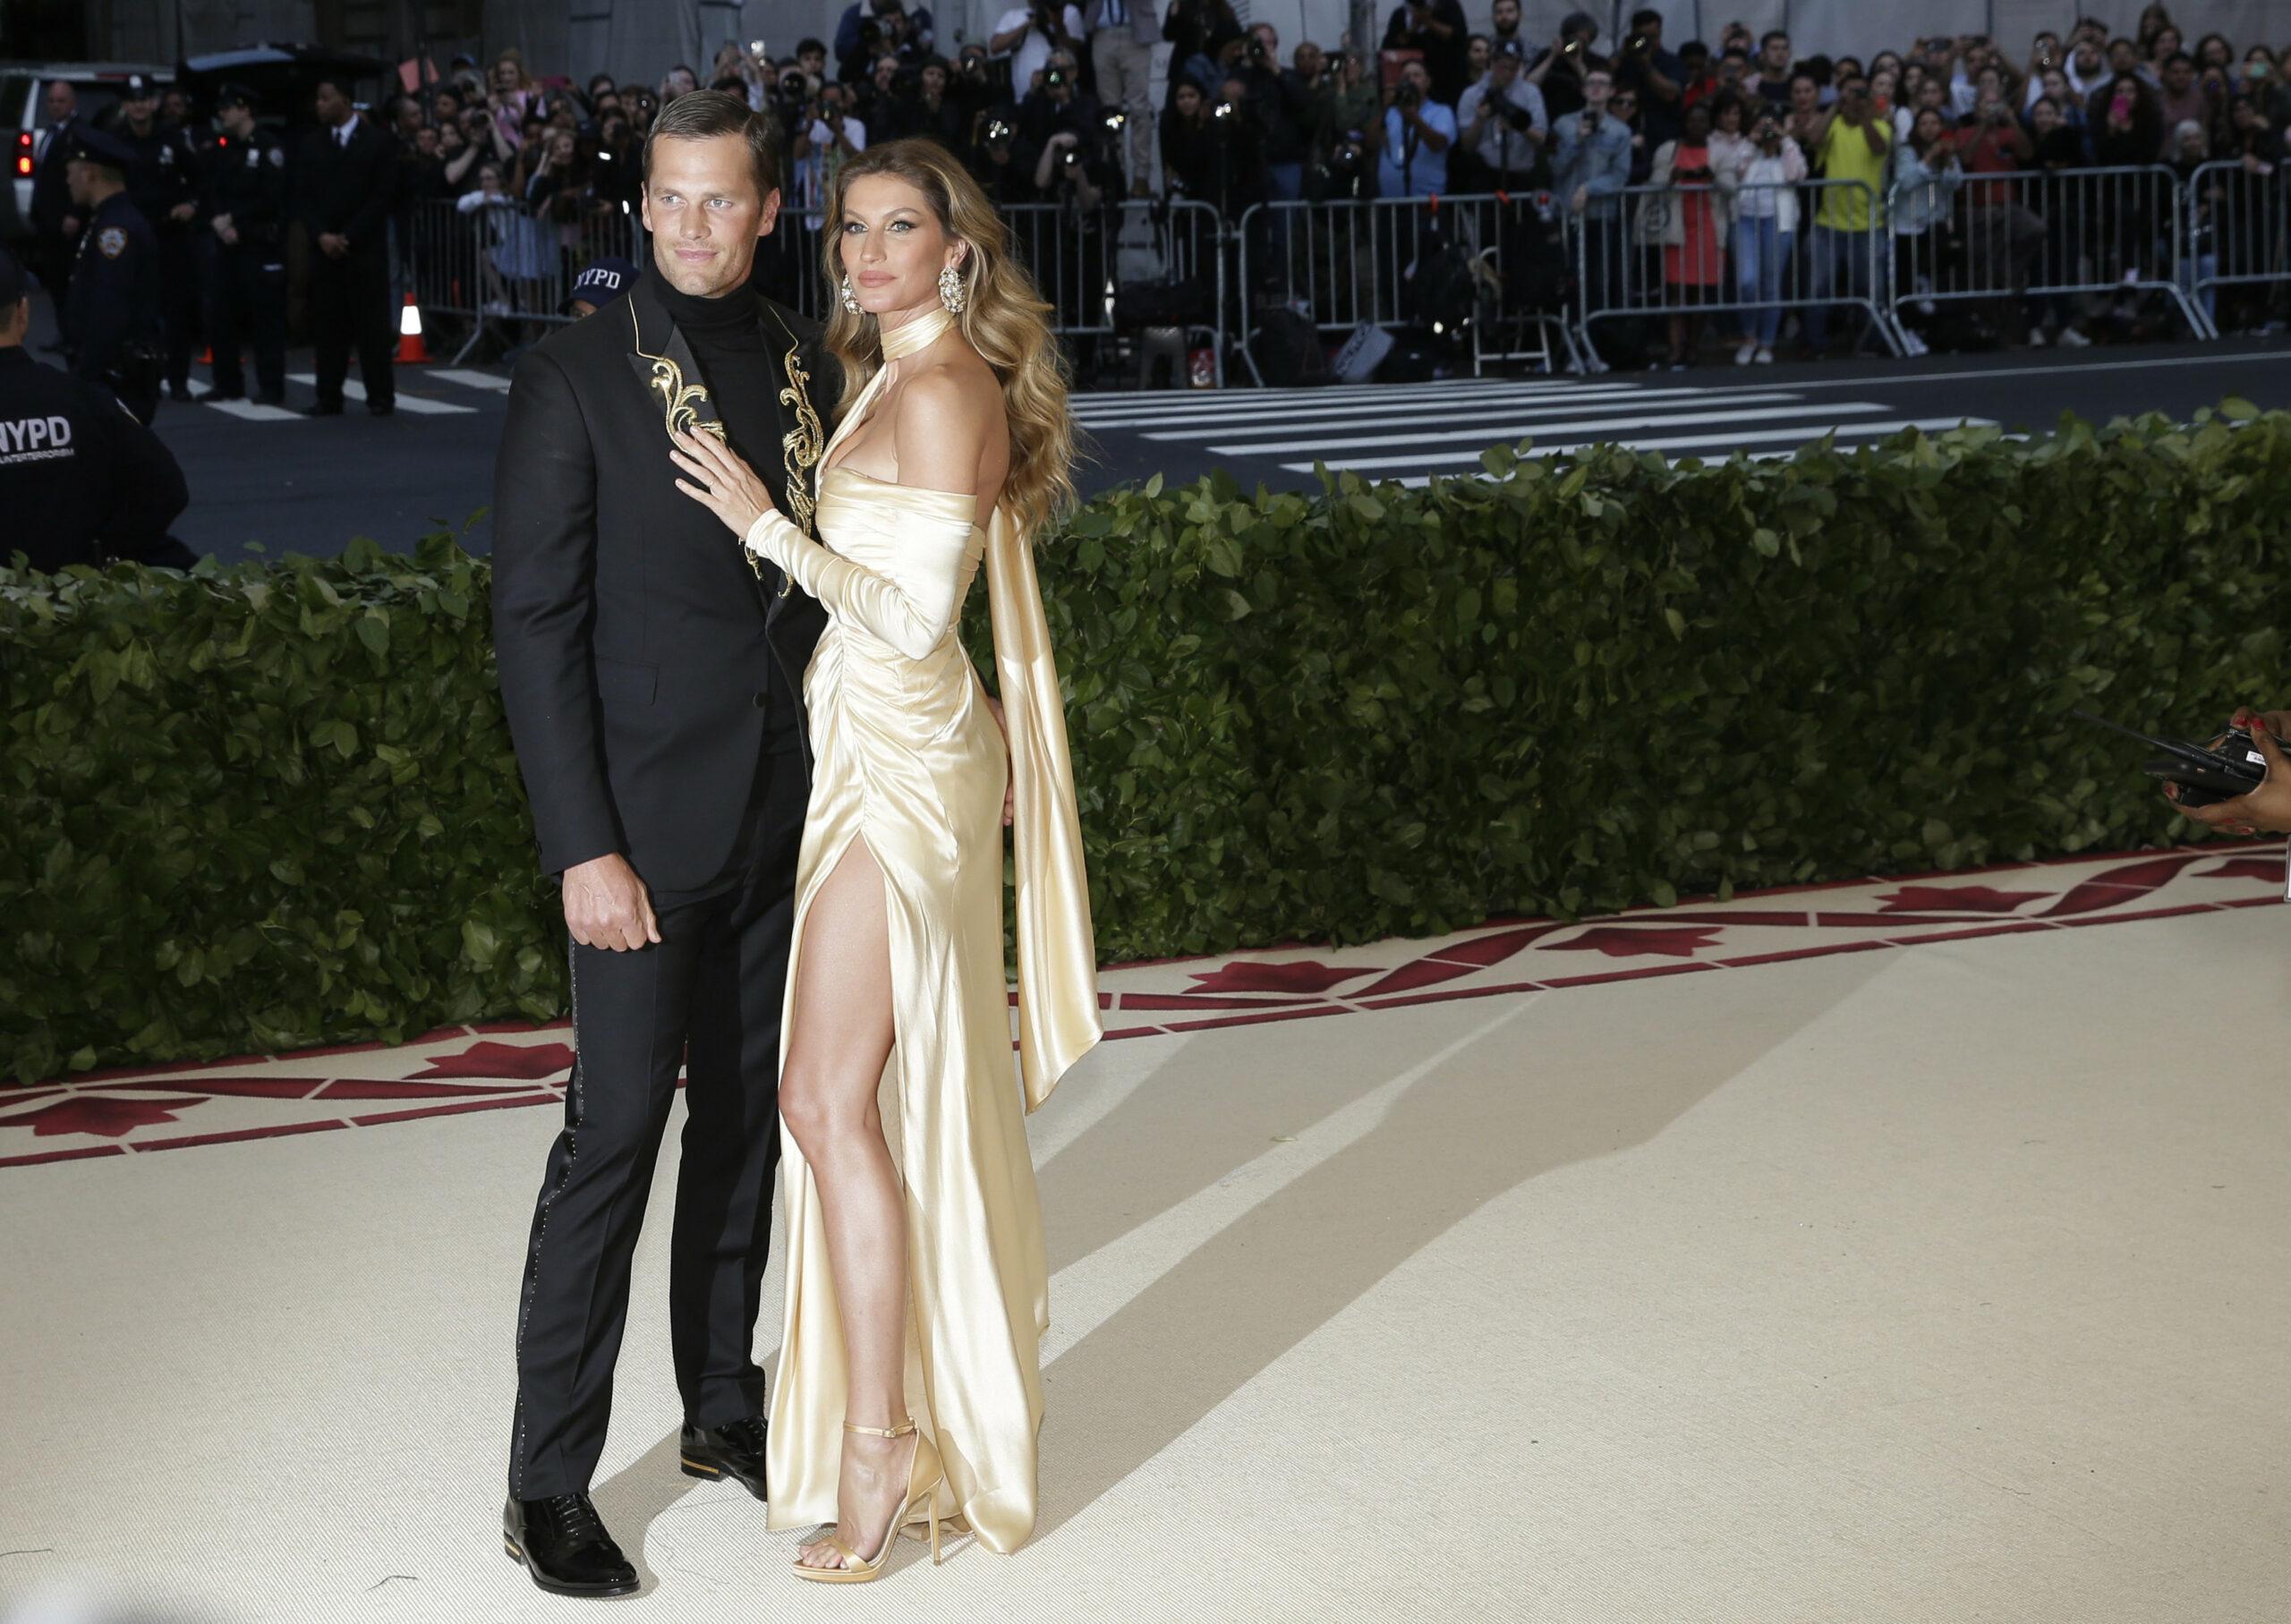 Tom Brady and Gisele Bundchen arrive on the red carpet at The Metropolitan Museum of Art's Costume Institute Benefit 